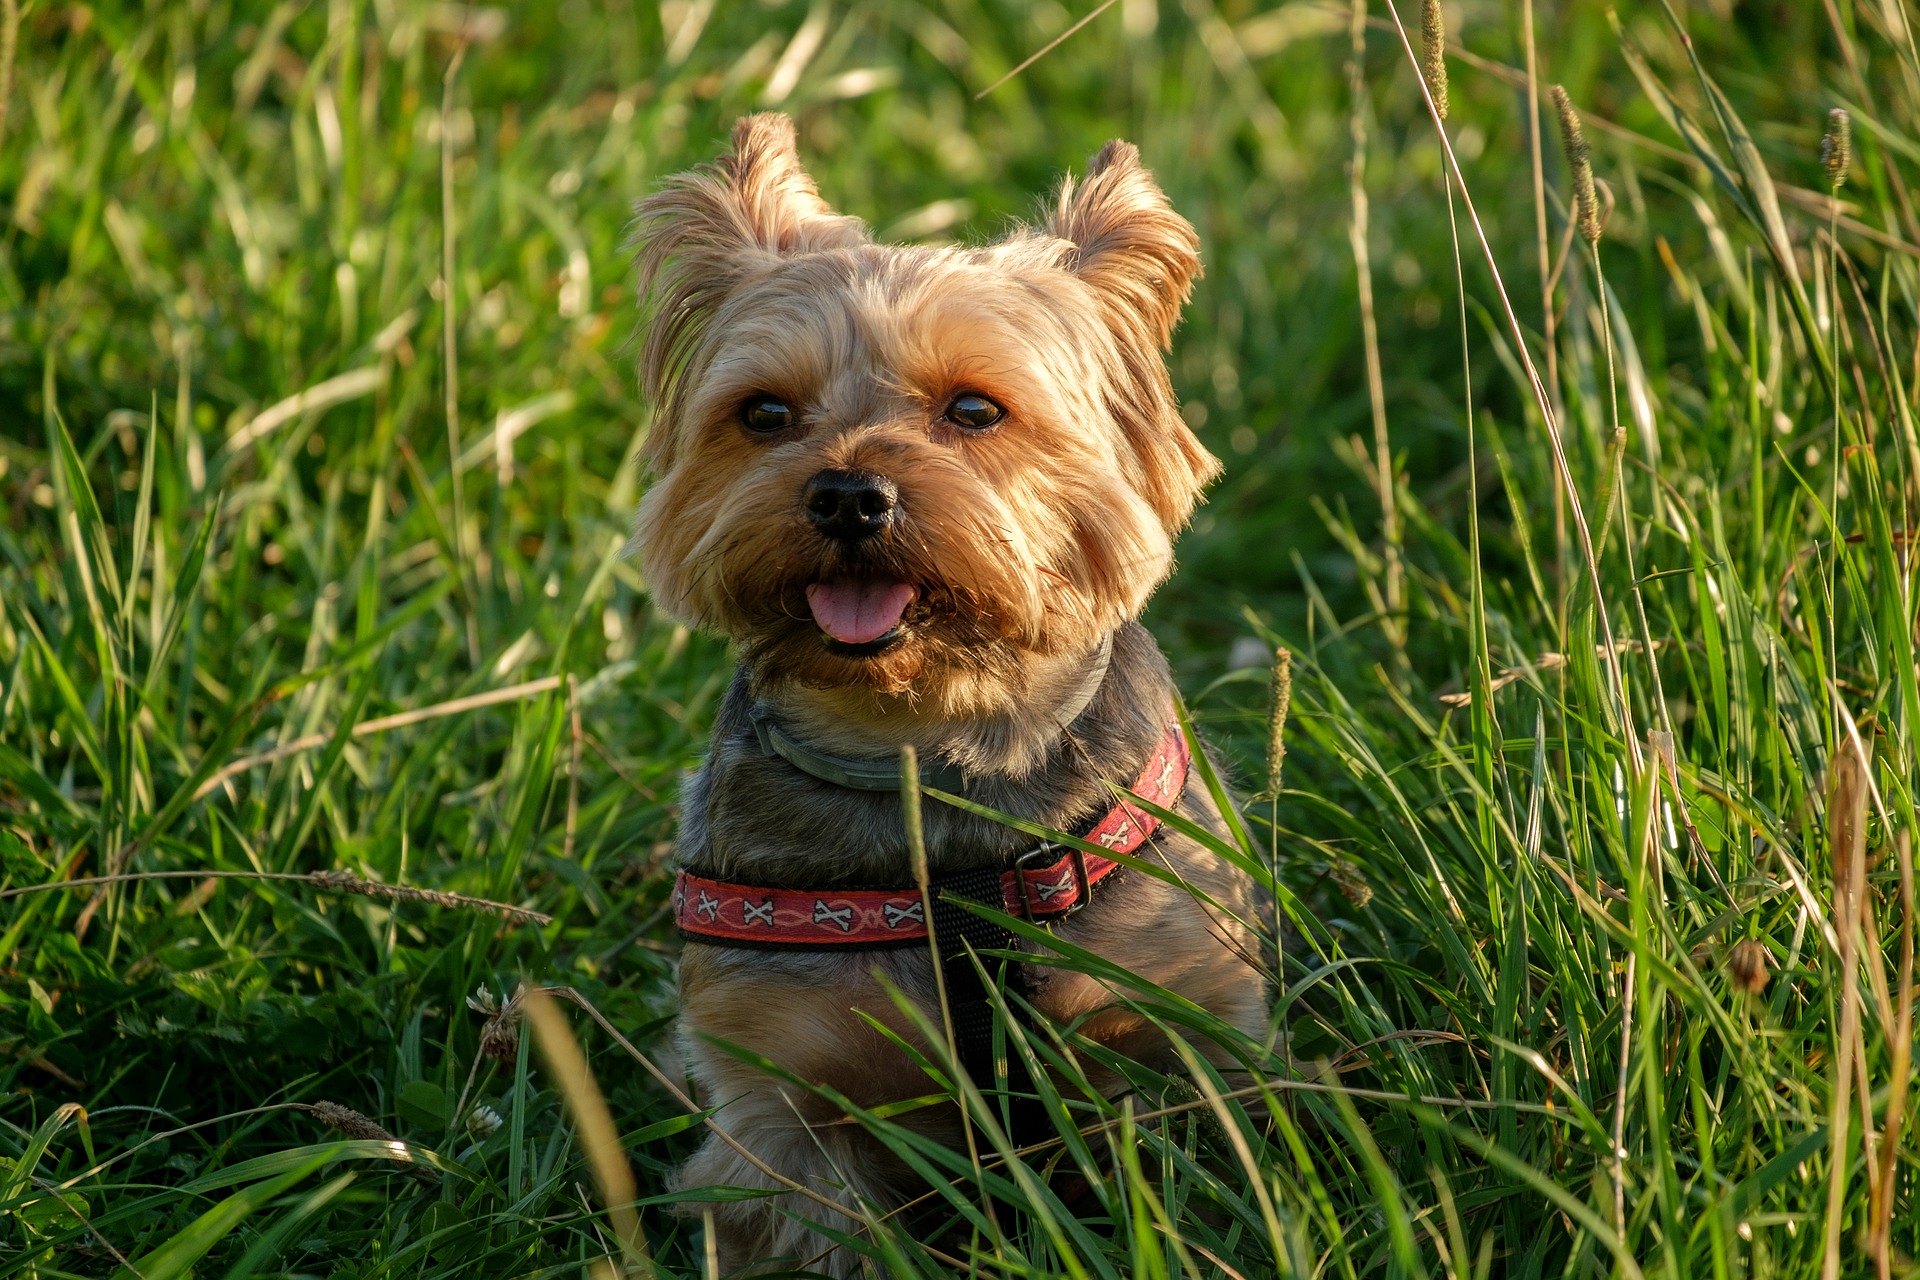 best canned dog food for yorkies